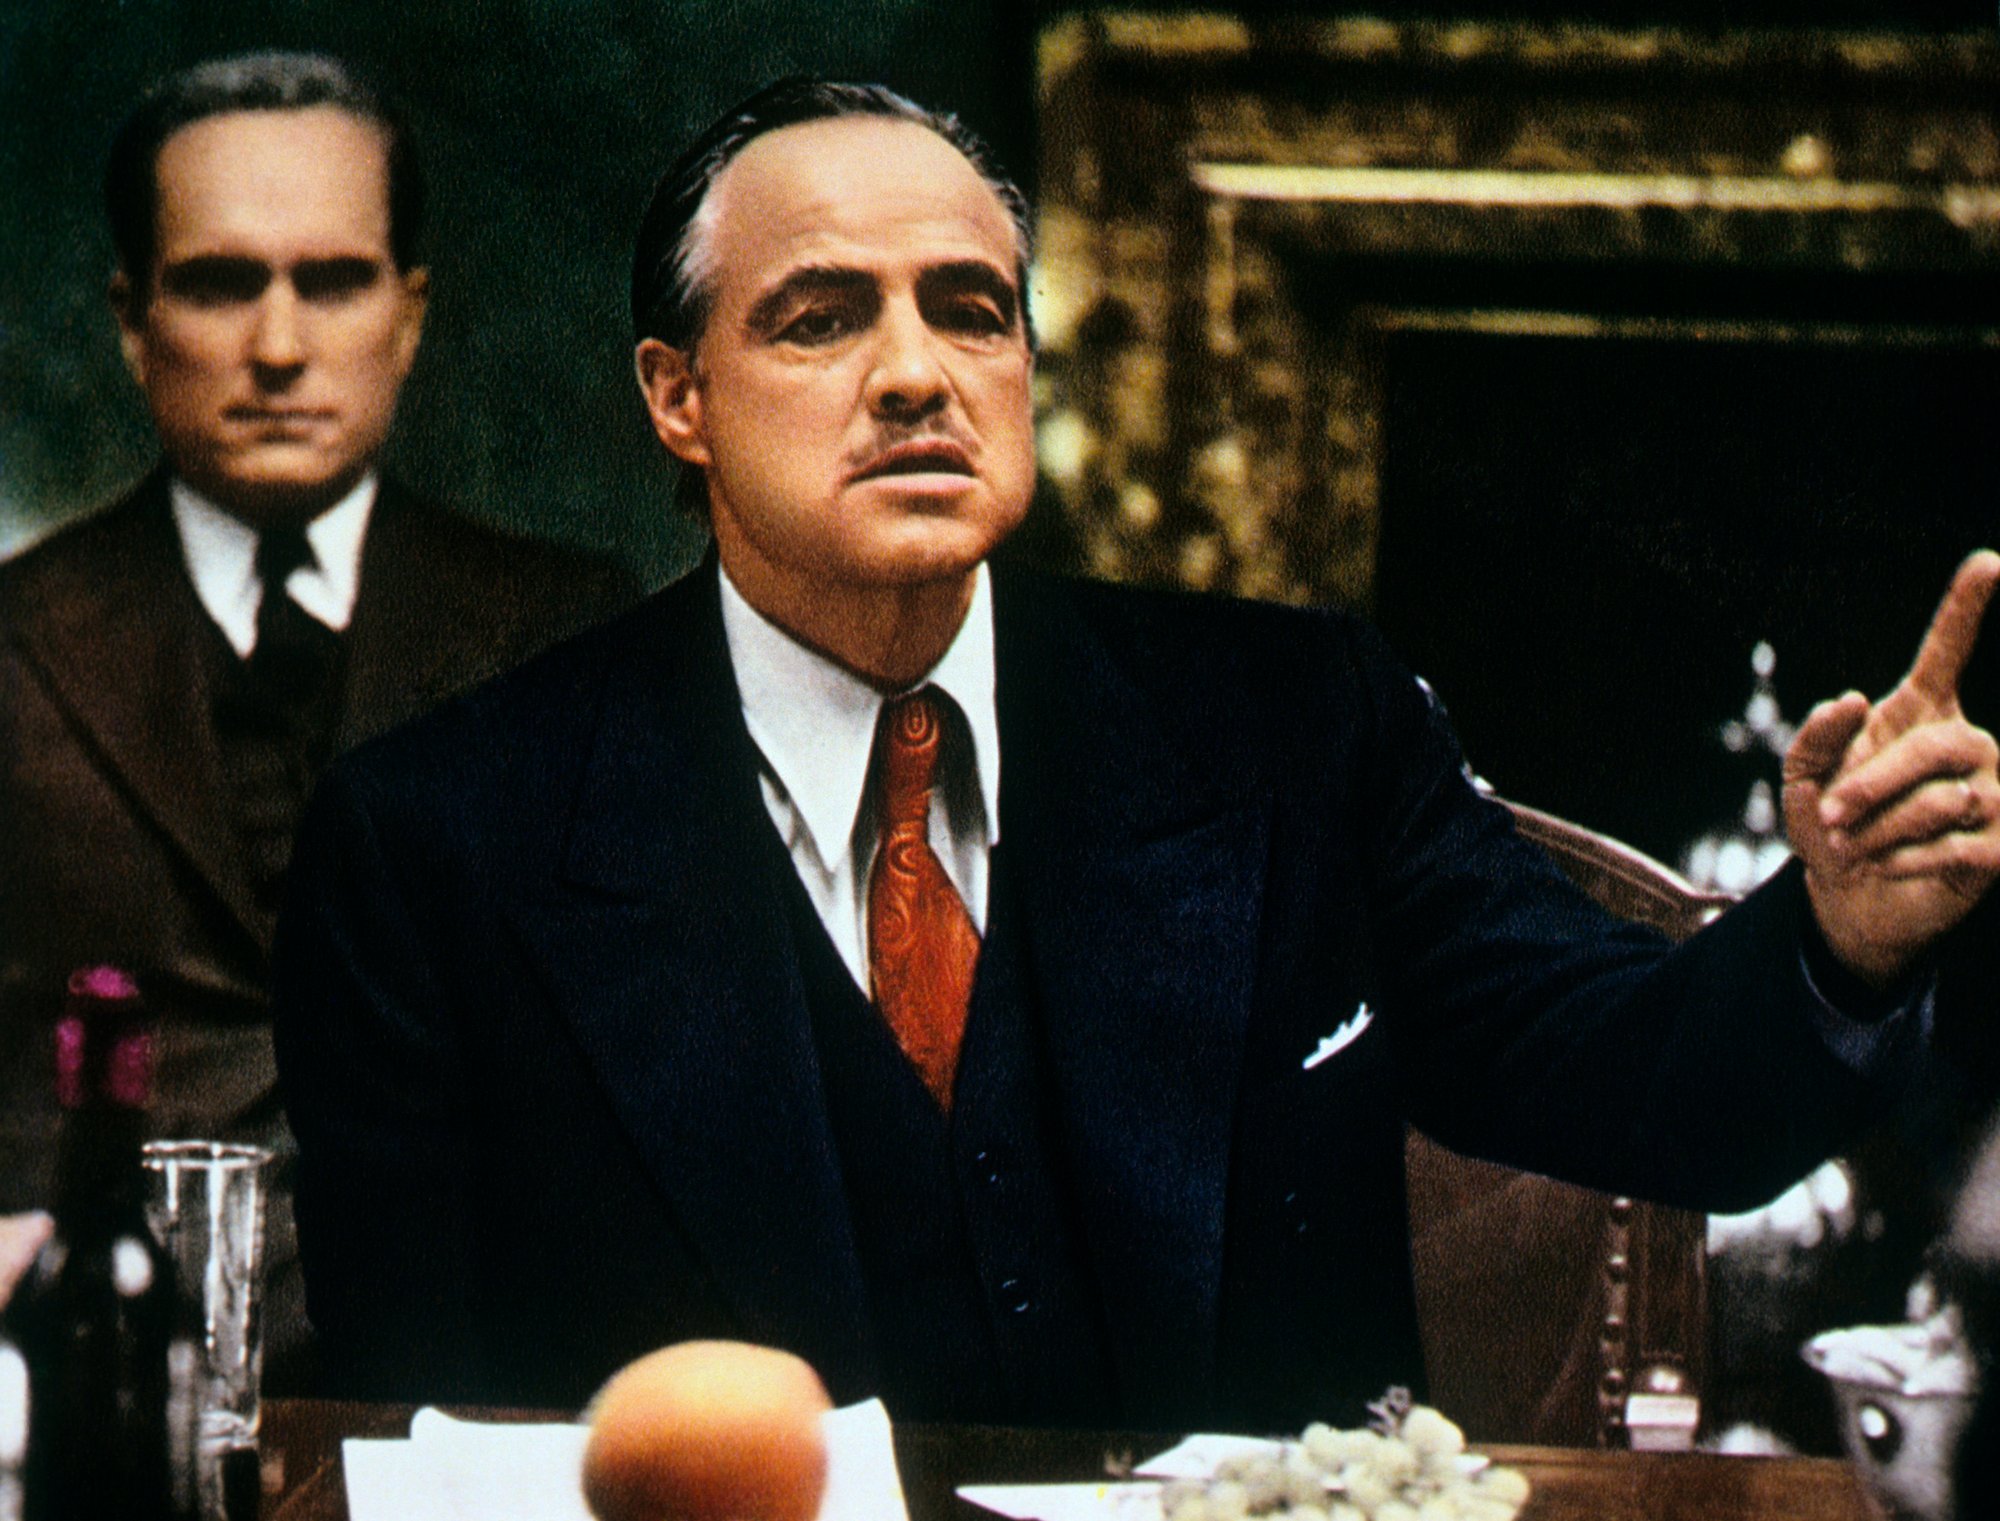 Marlon Brando in The Godfather sitting at a table